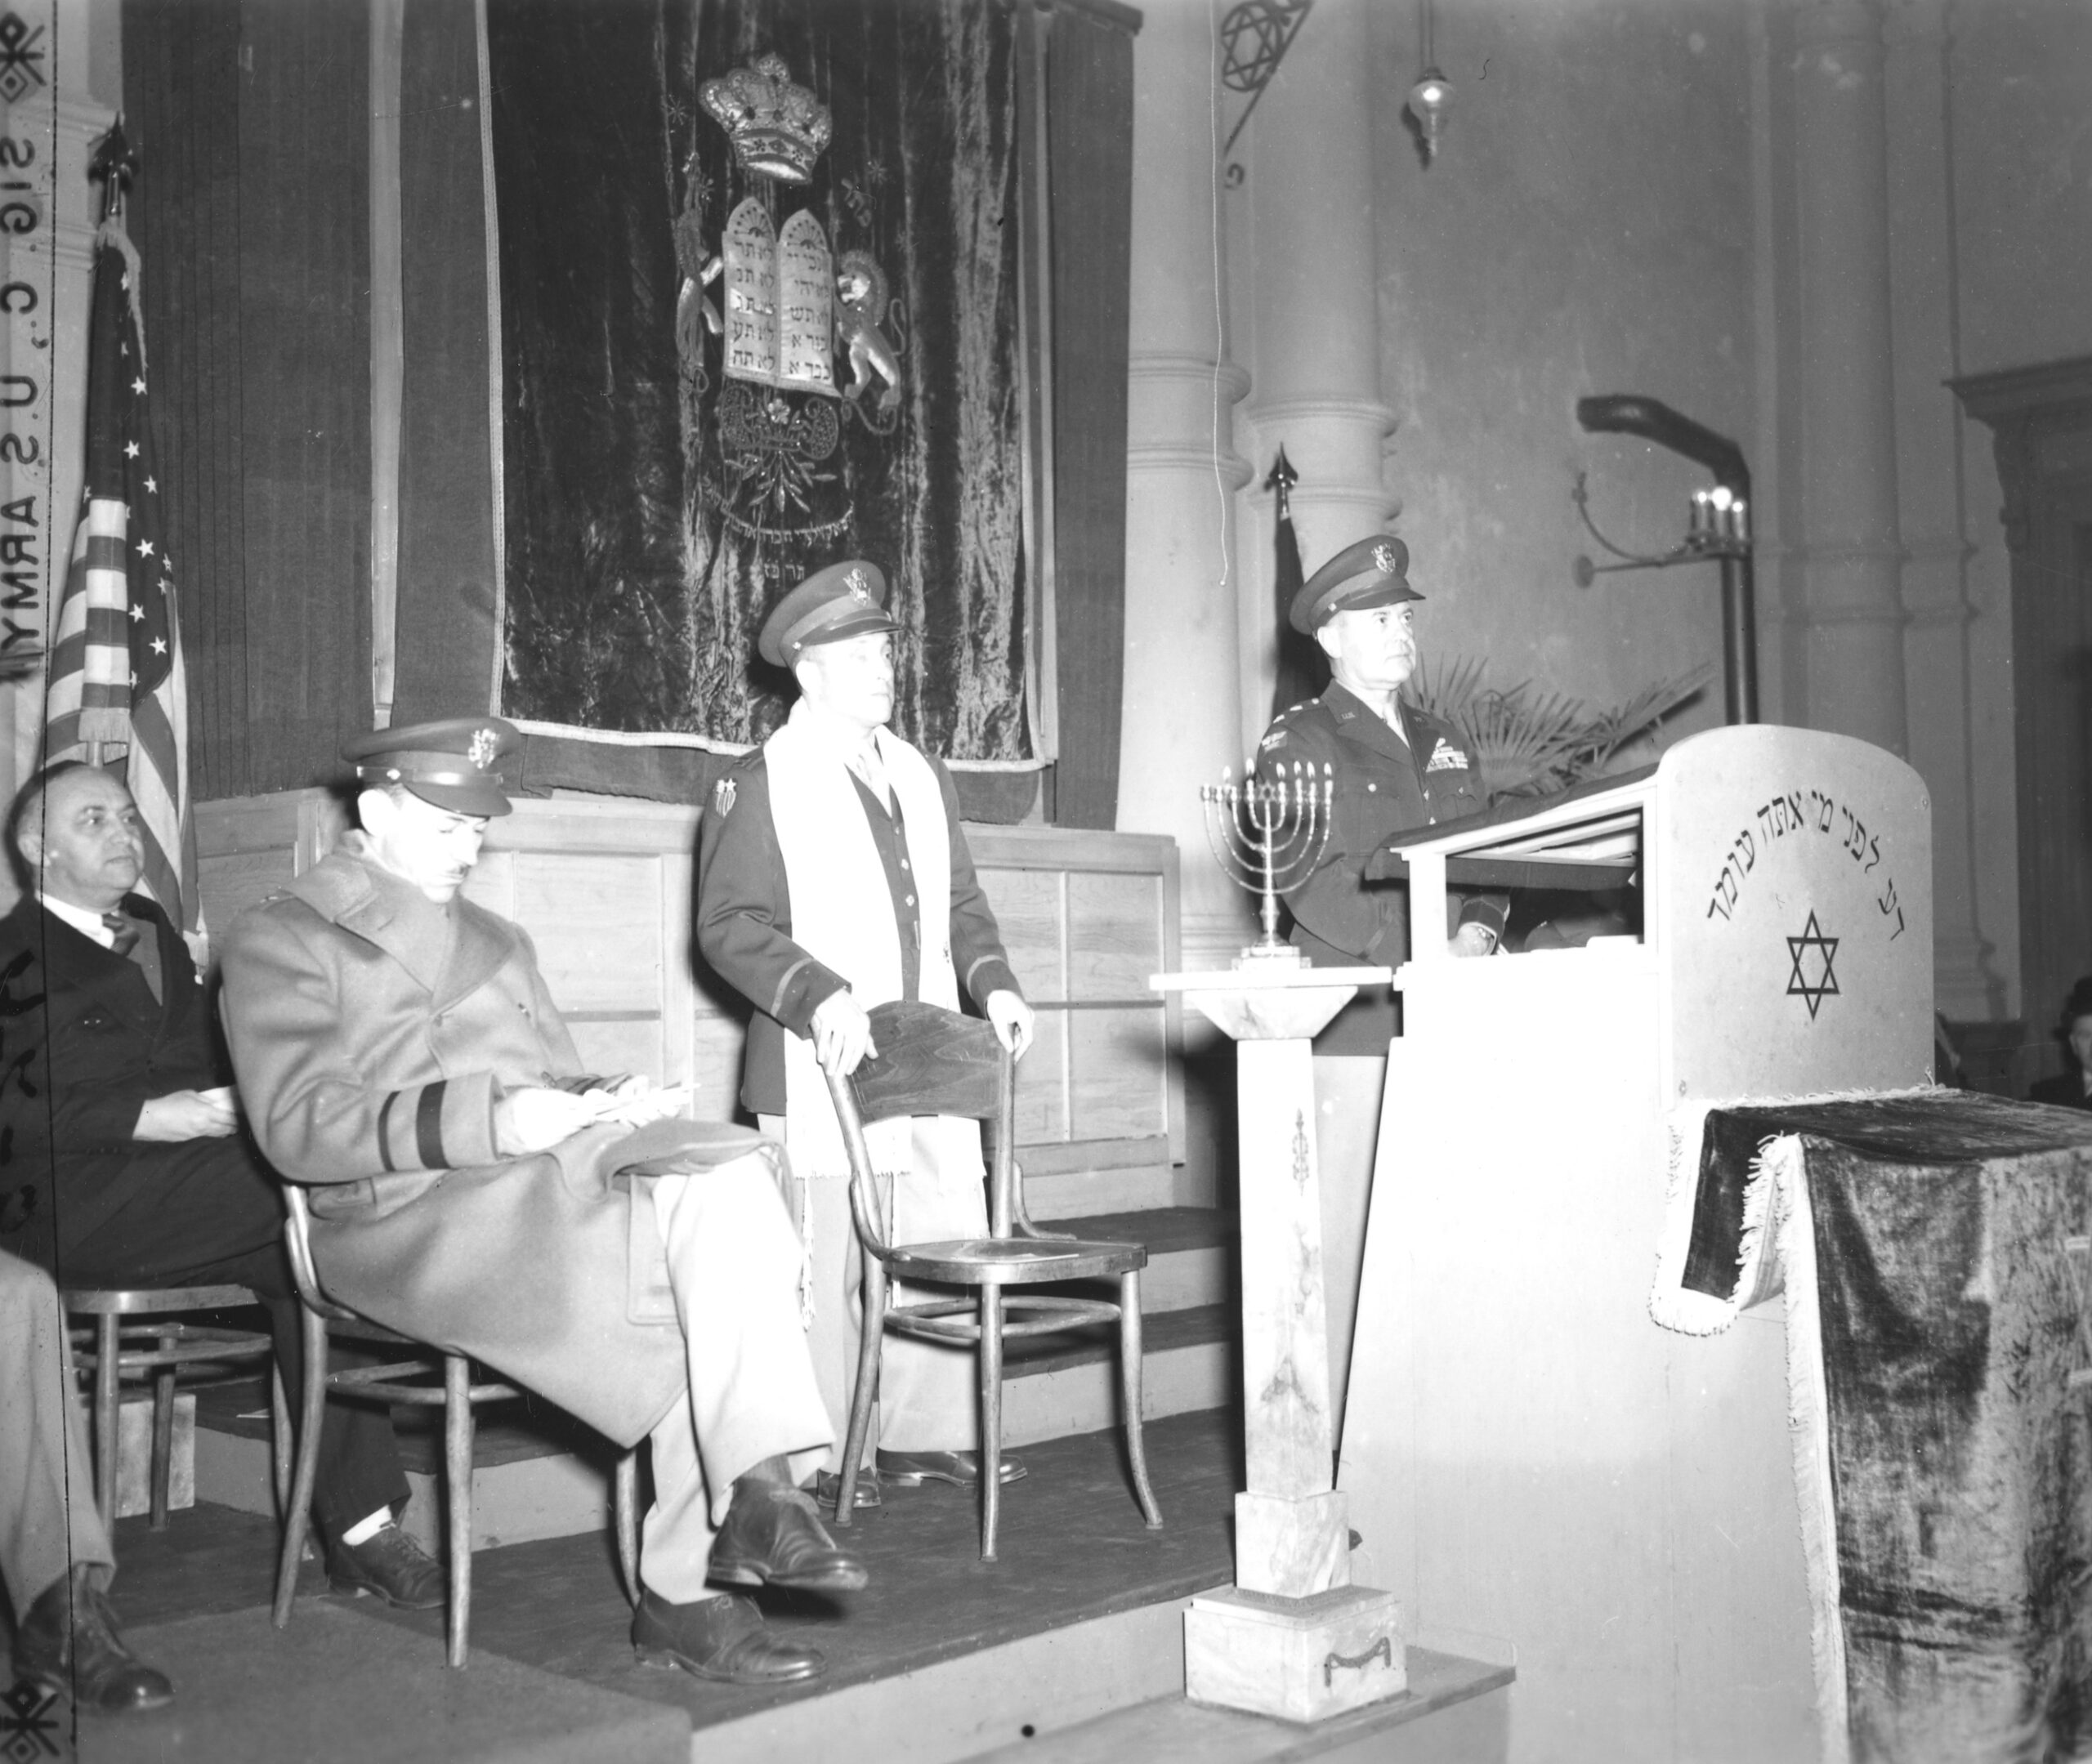 Rededication of the Wiesbaden synagogue on December 22, 1946. HHStAW fonds 3008, 33, no. 086